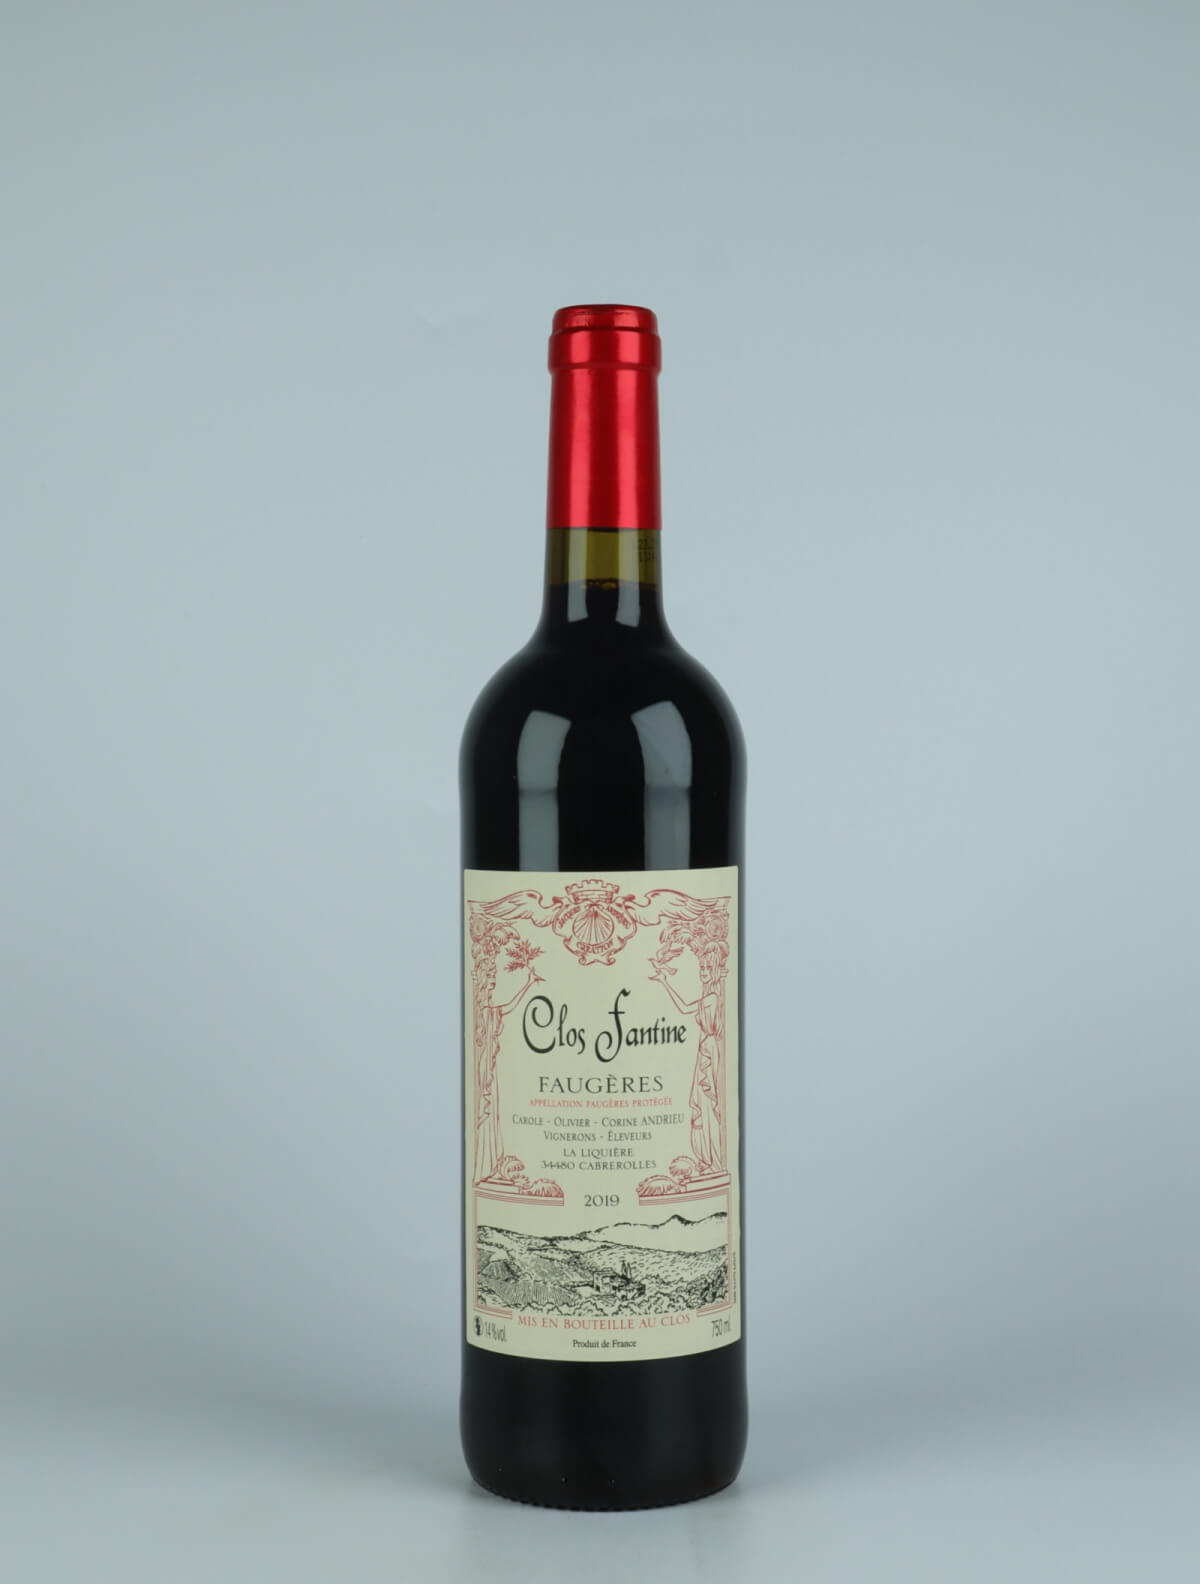 A bottle  Faugères - Tradition Red wine from Clos Fantine, Languedoc in France